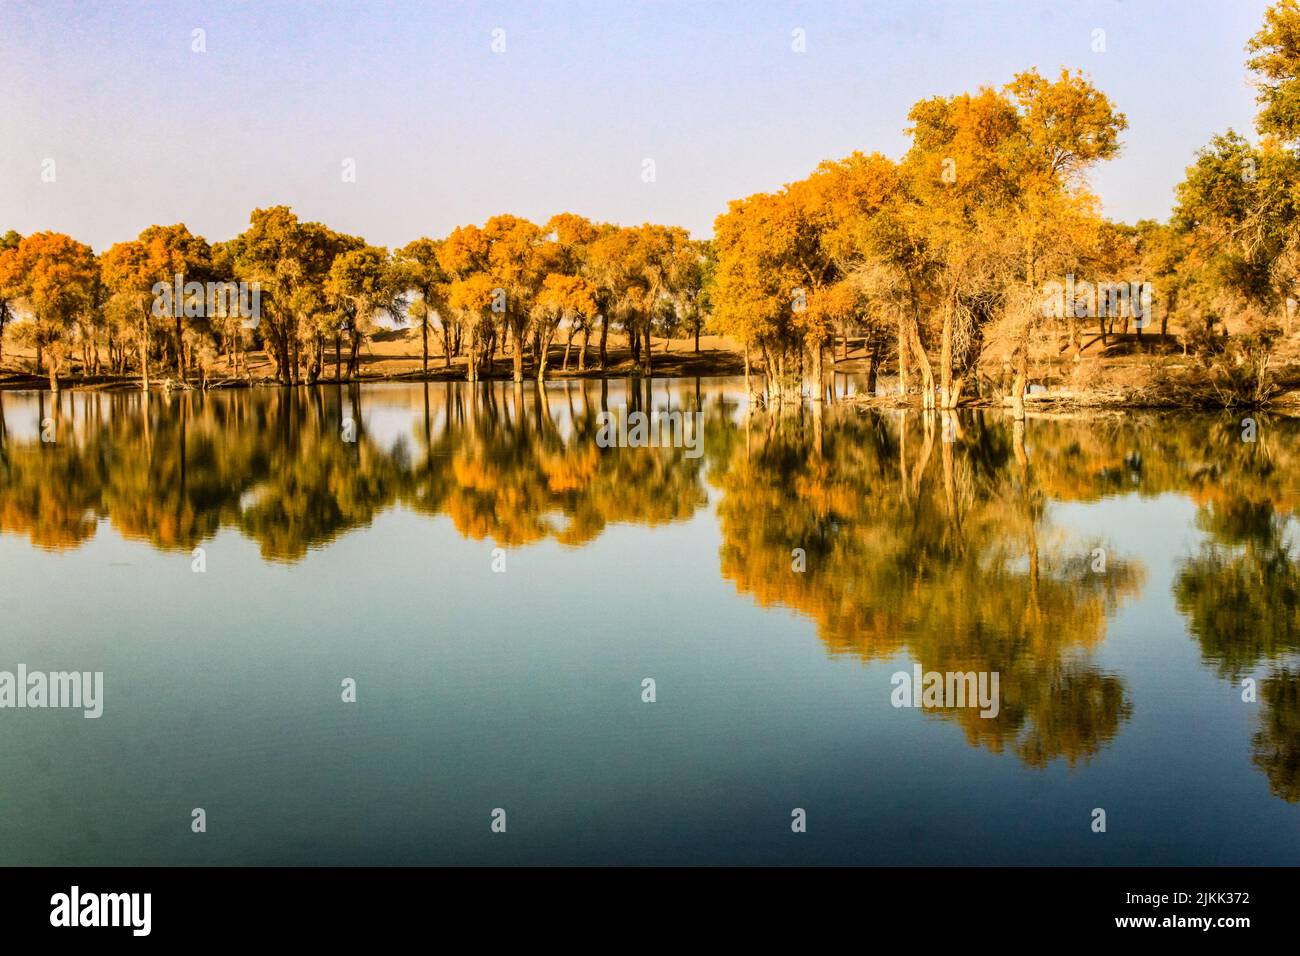 The trees on the lakeshore of Lop Nor Lake with visible reflections on the water on a beautiful sunny day in Xinjiang, China Stock Photo